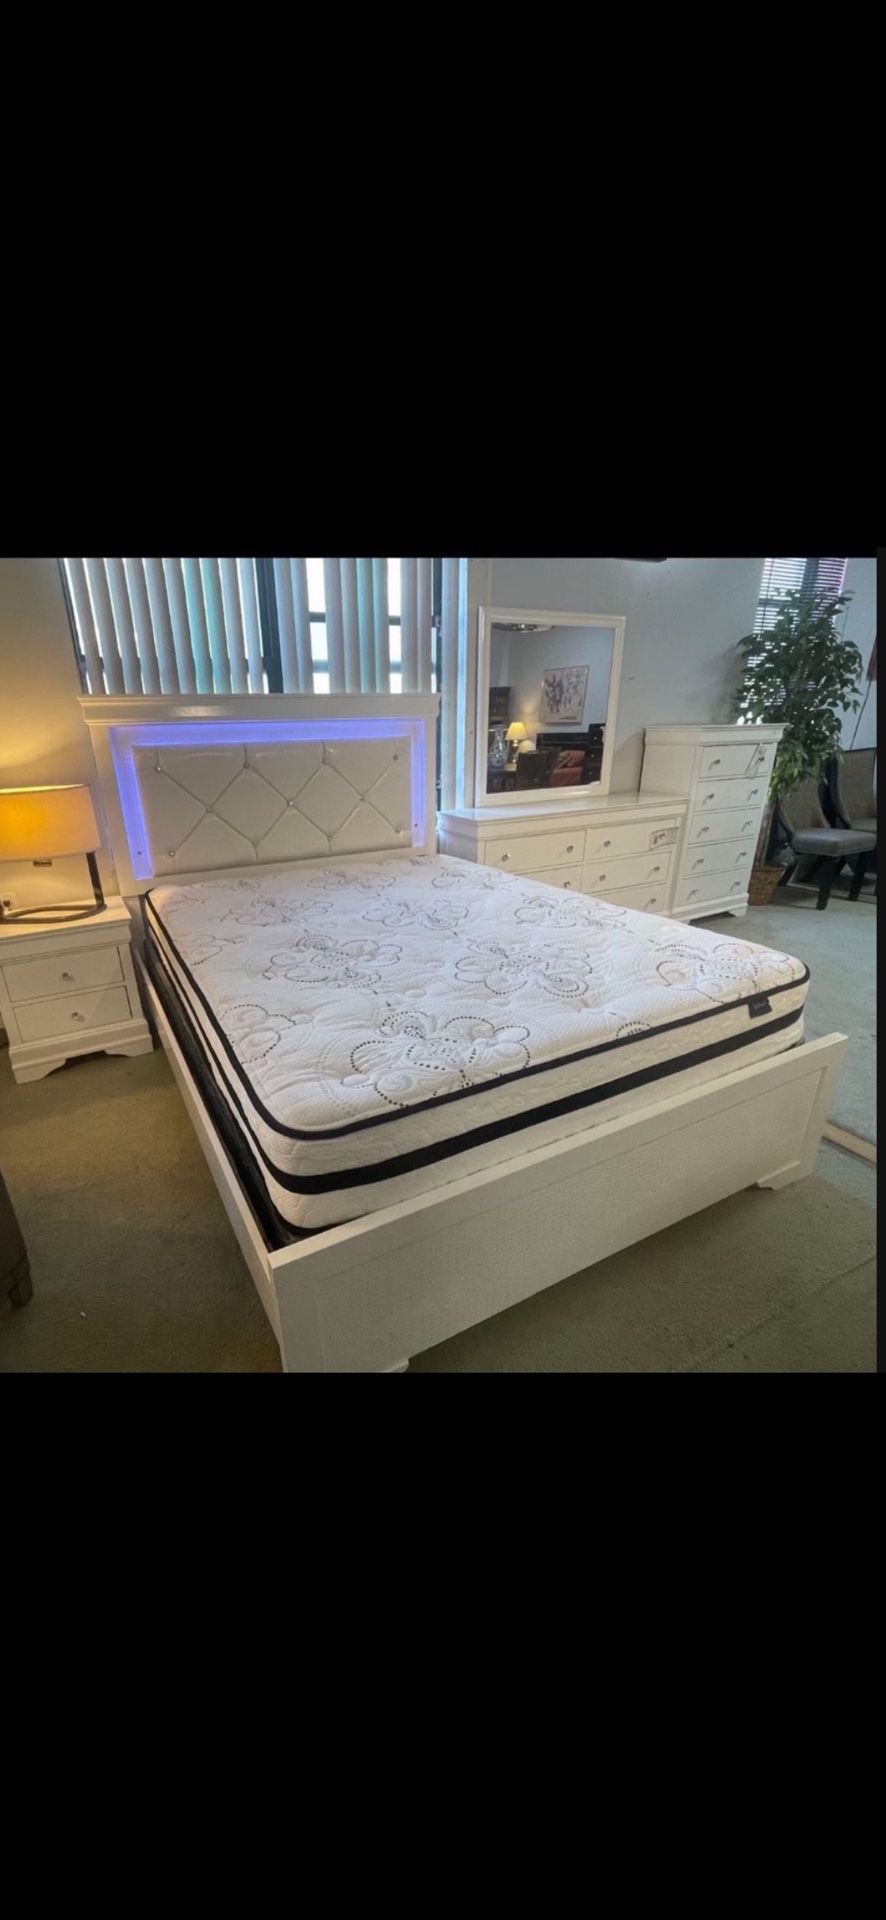 Brand New Complete Bedroom Set With FREE Orthopedic Mattress For $999